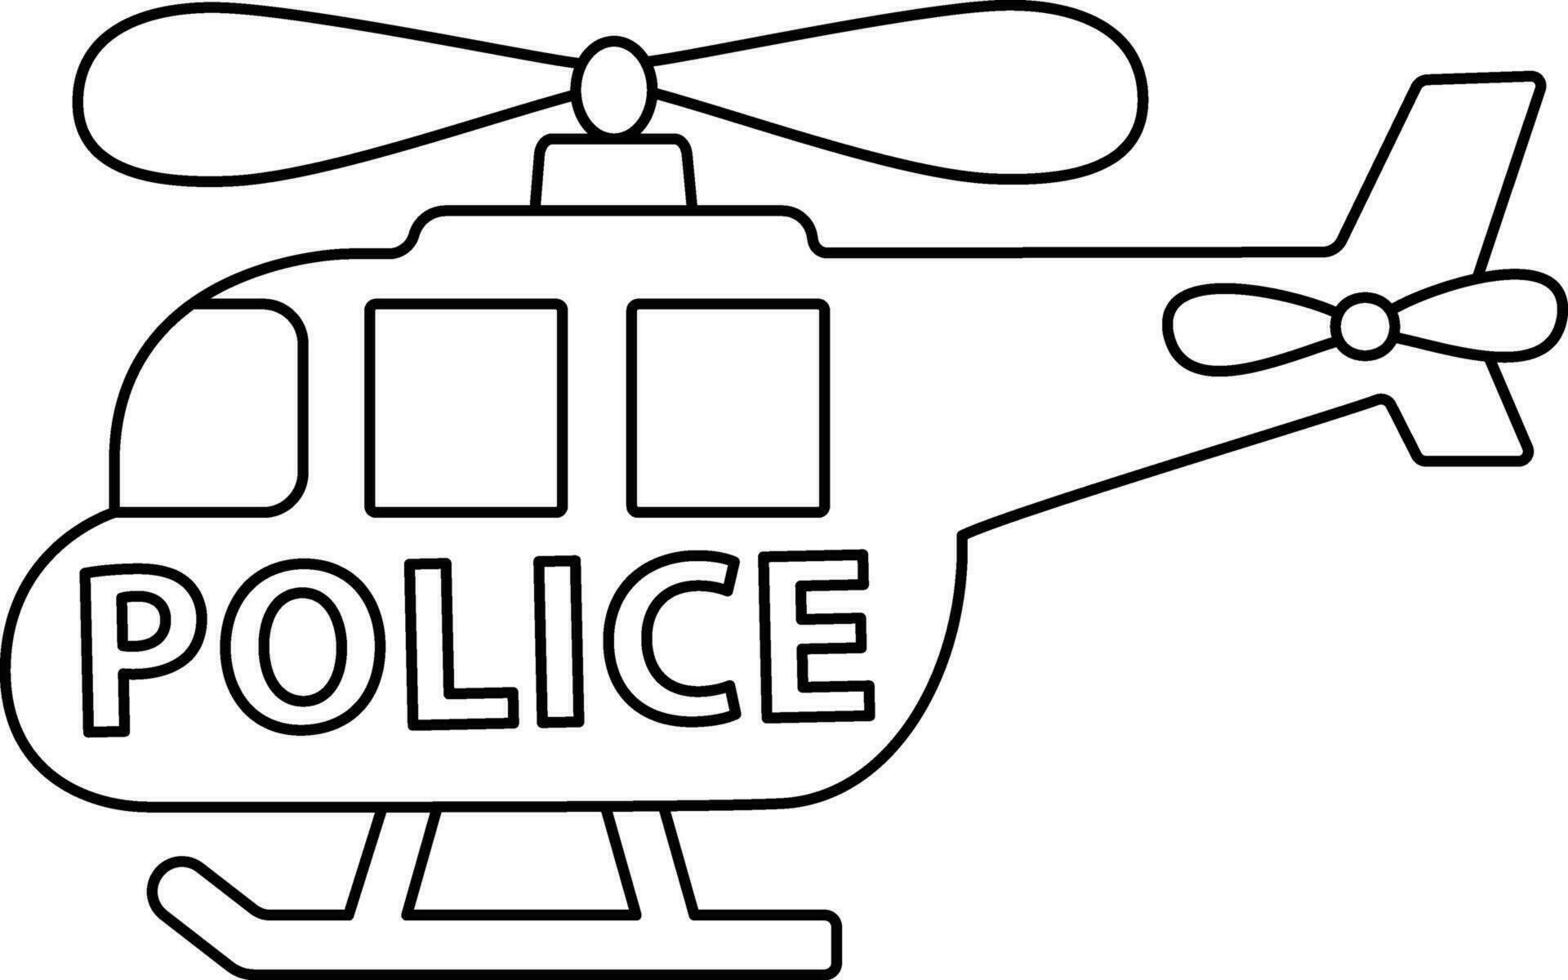 Police helicopter with black isolated line design vector